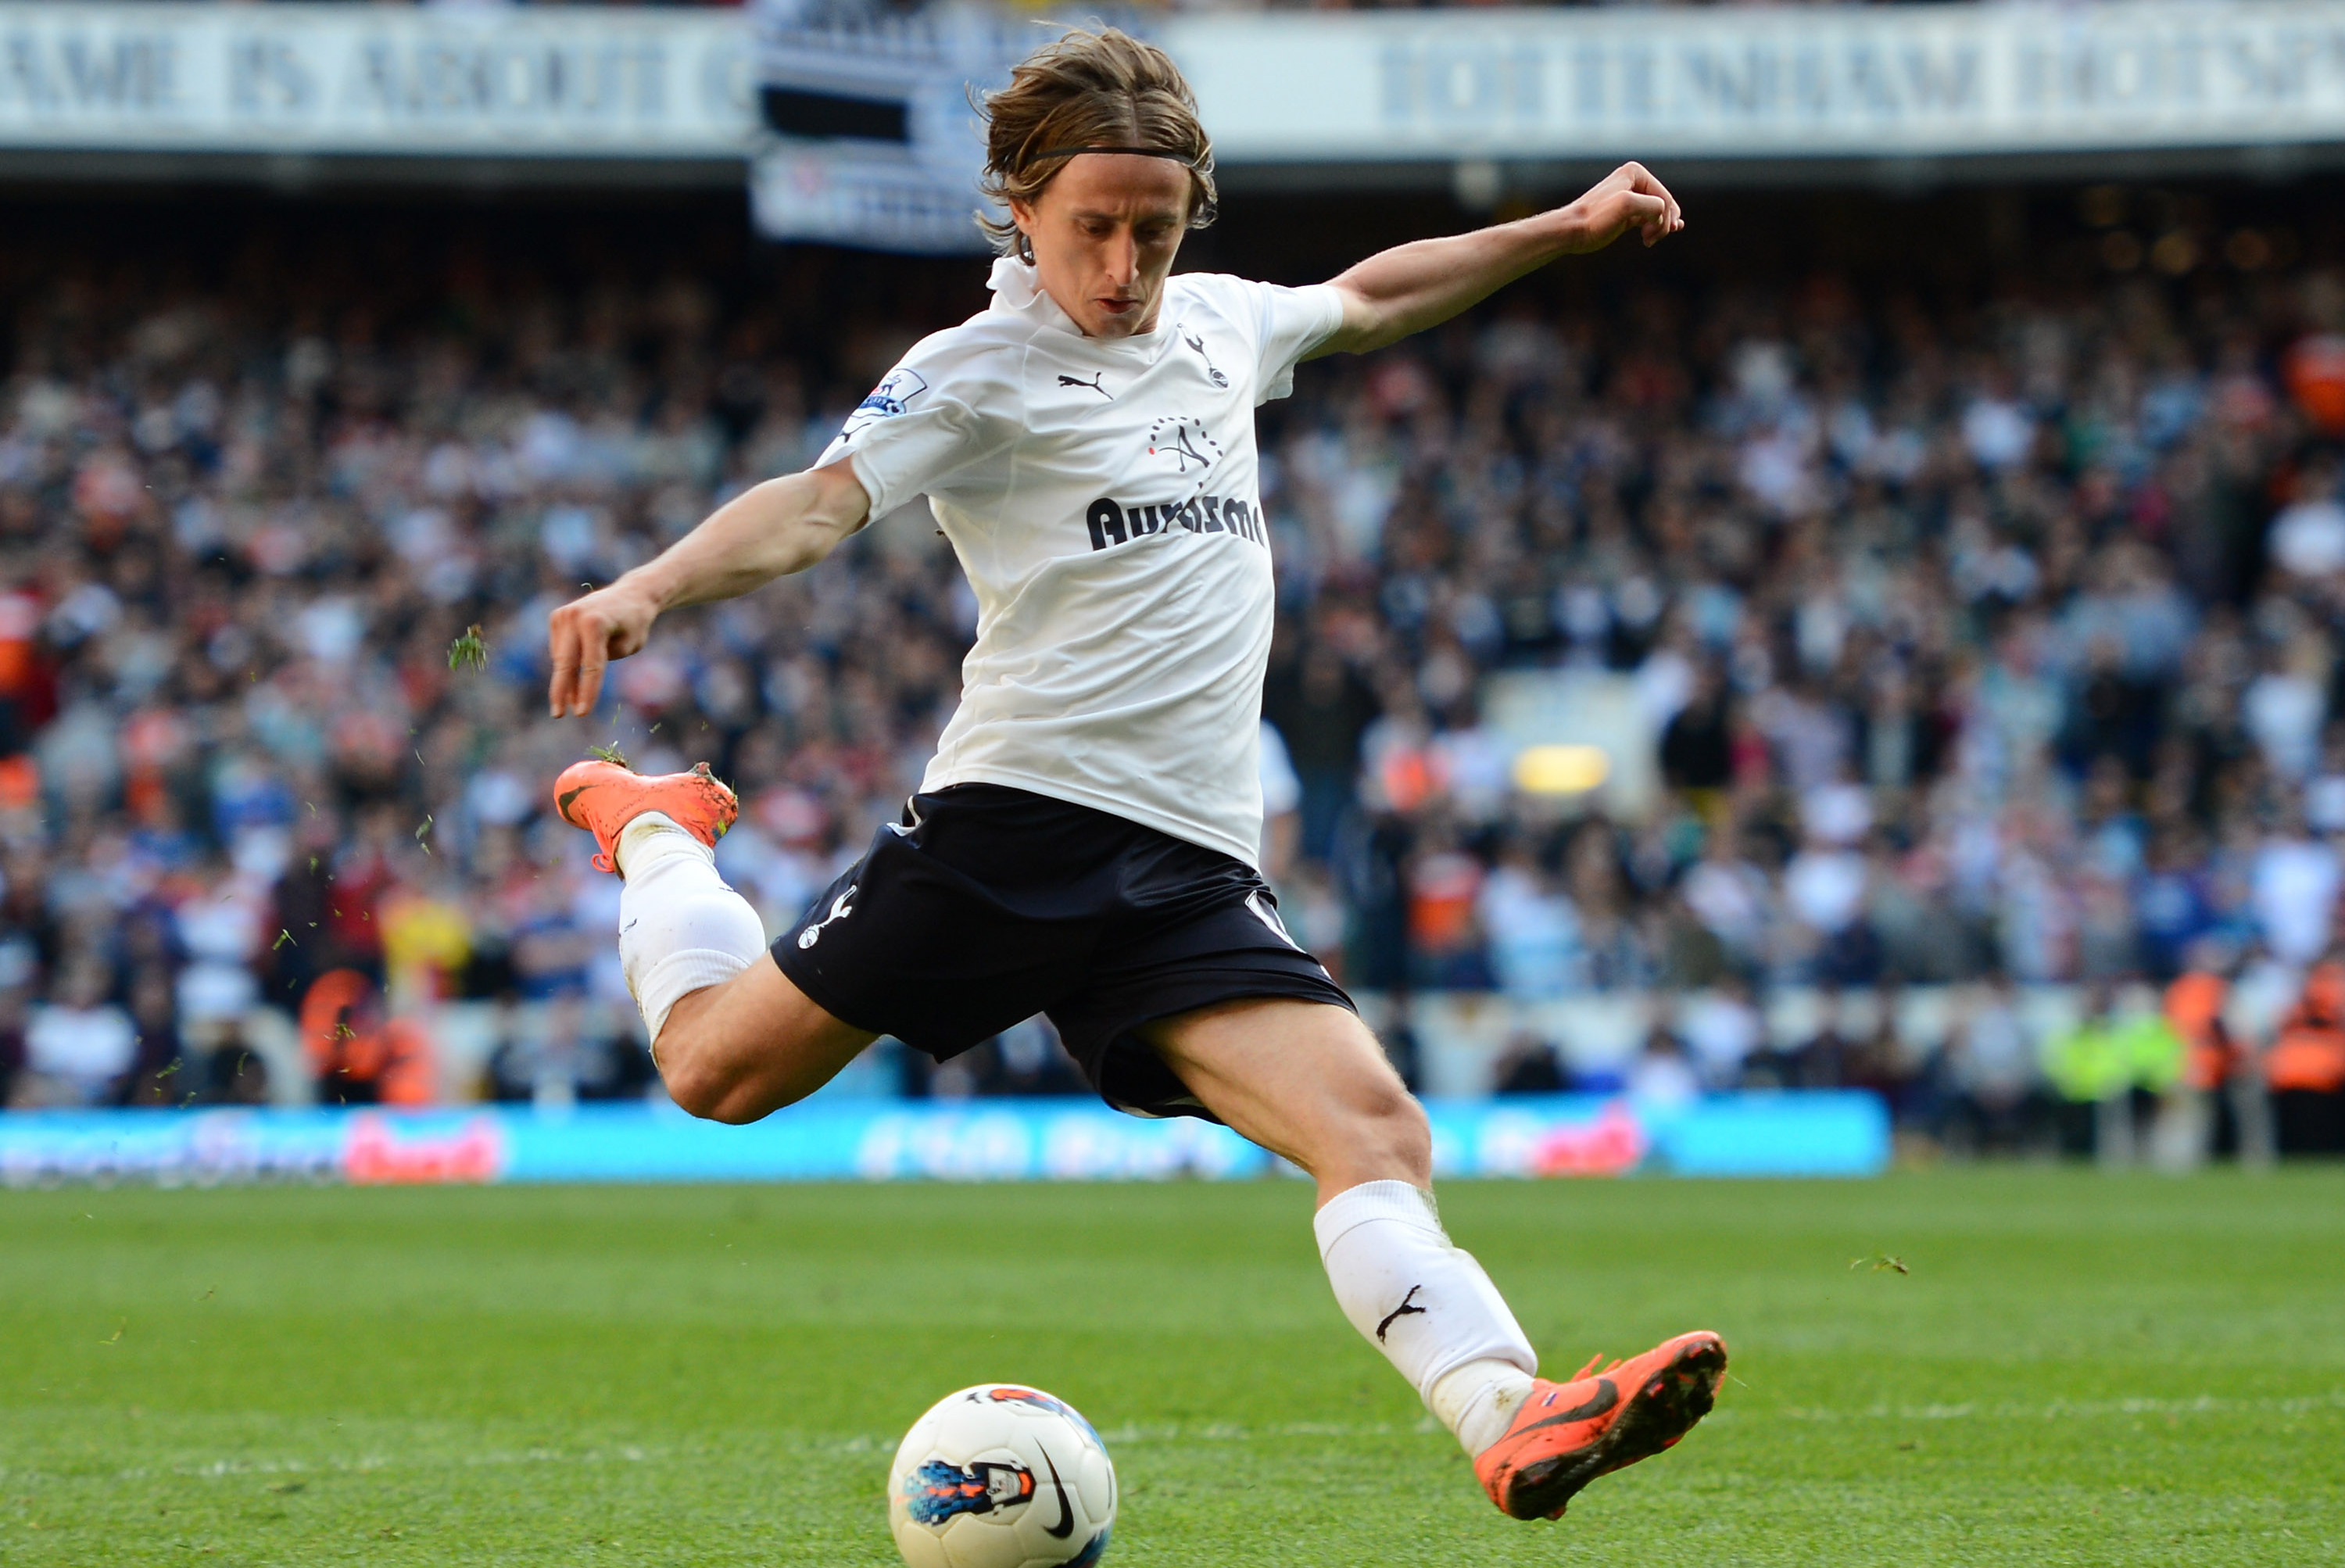 Real Madrid's signing of Luka Modric from Tottenham Hotspur latest  example of clubs jumping transfer gun